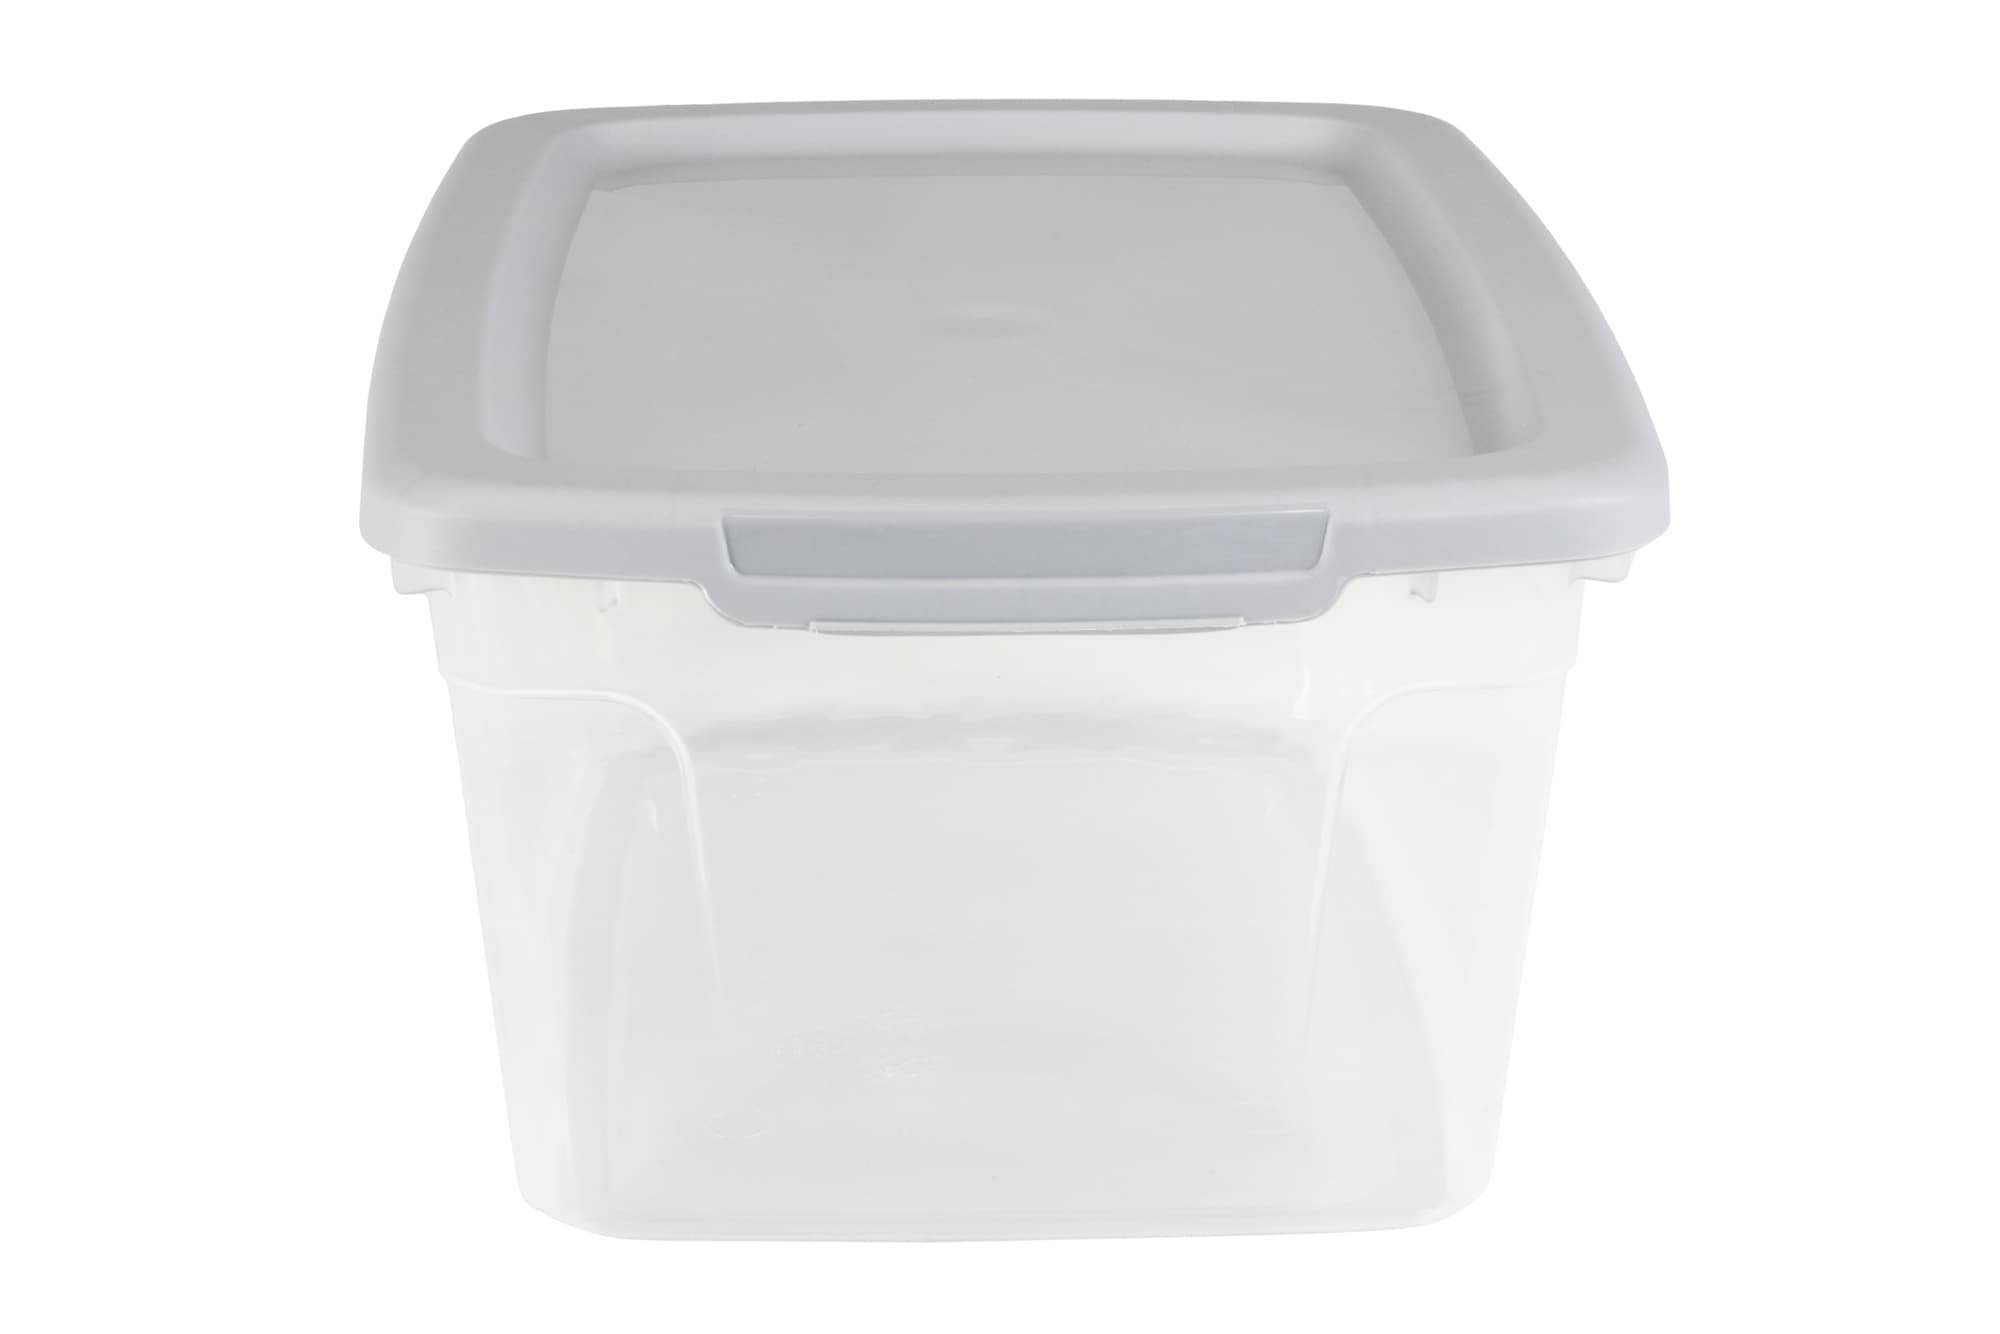 Project Source Medium 3.25-Gallons (13-Quart) Clear Tote with